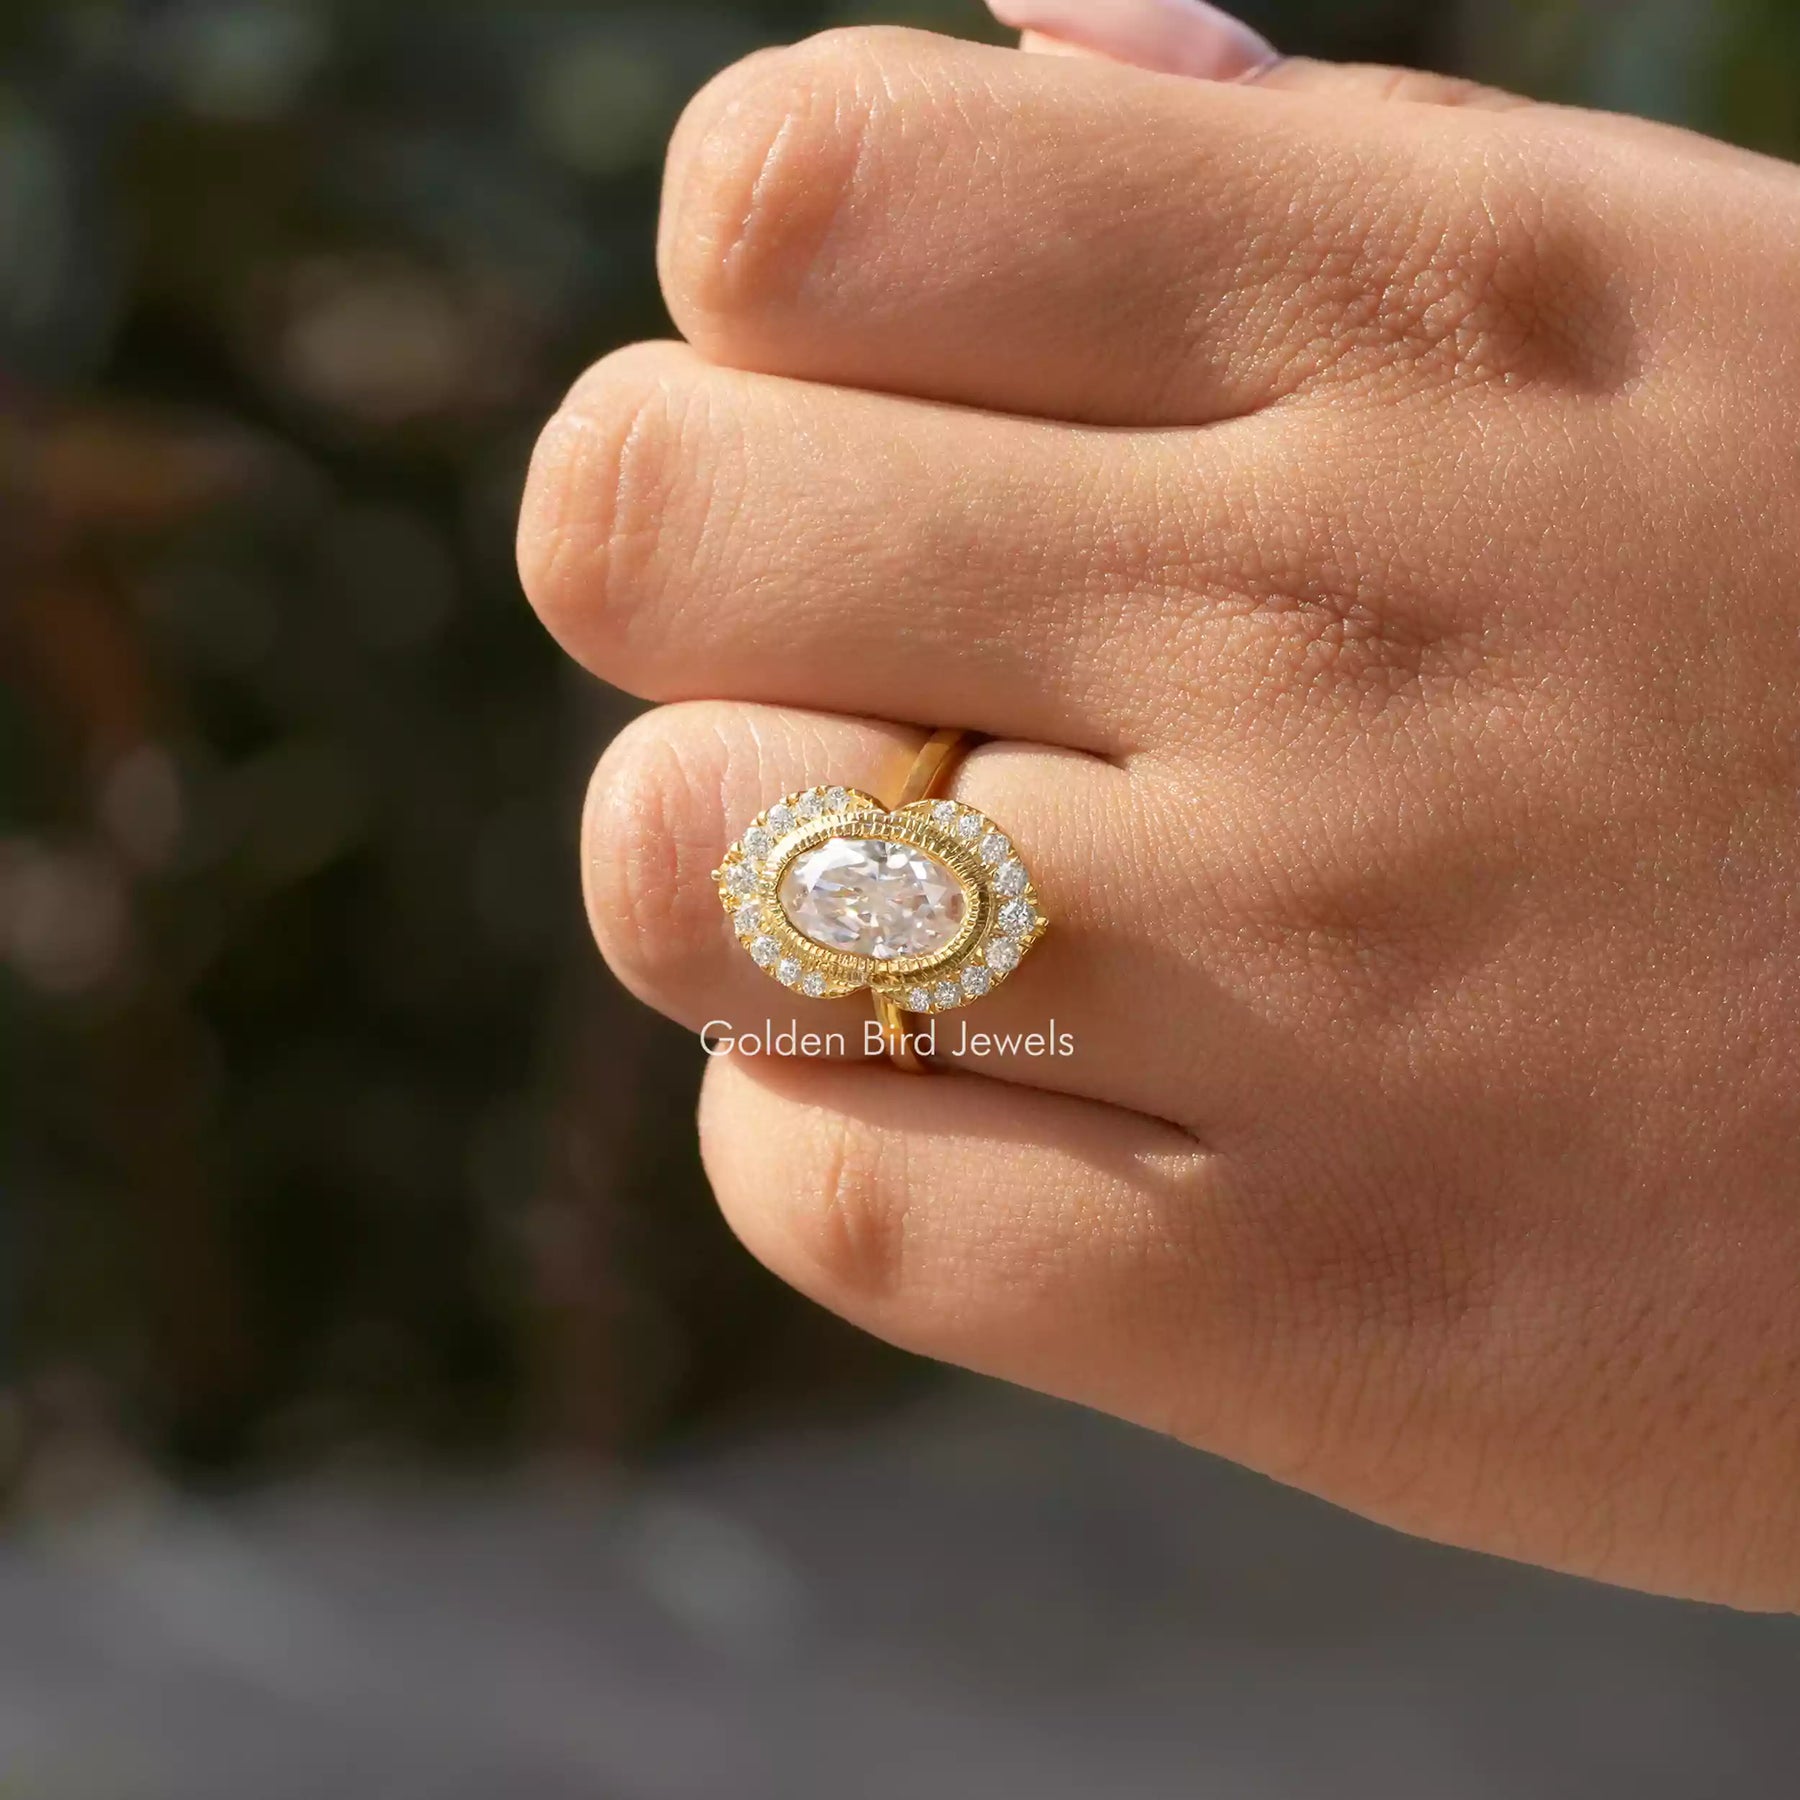 [In finger view of oval halo engagement ring]-[Golden Bird Jewels]